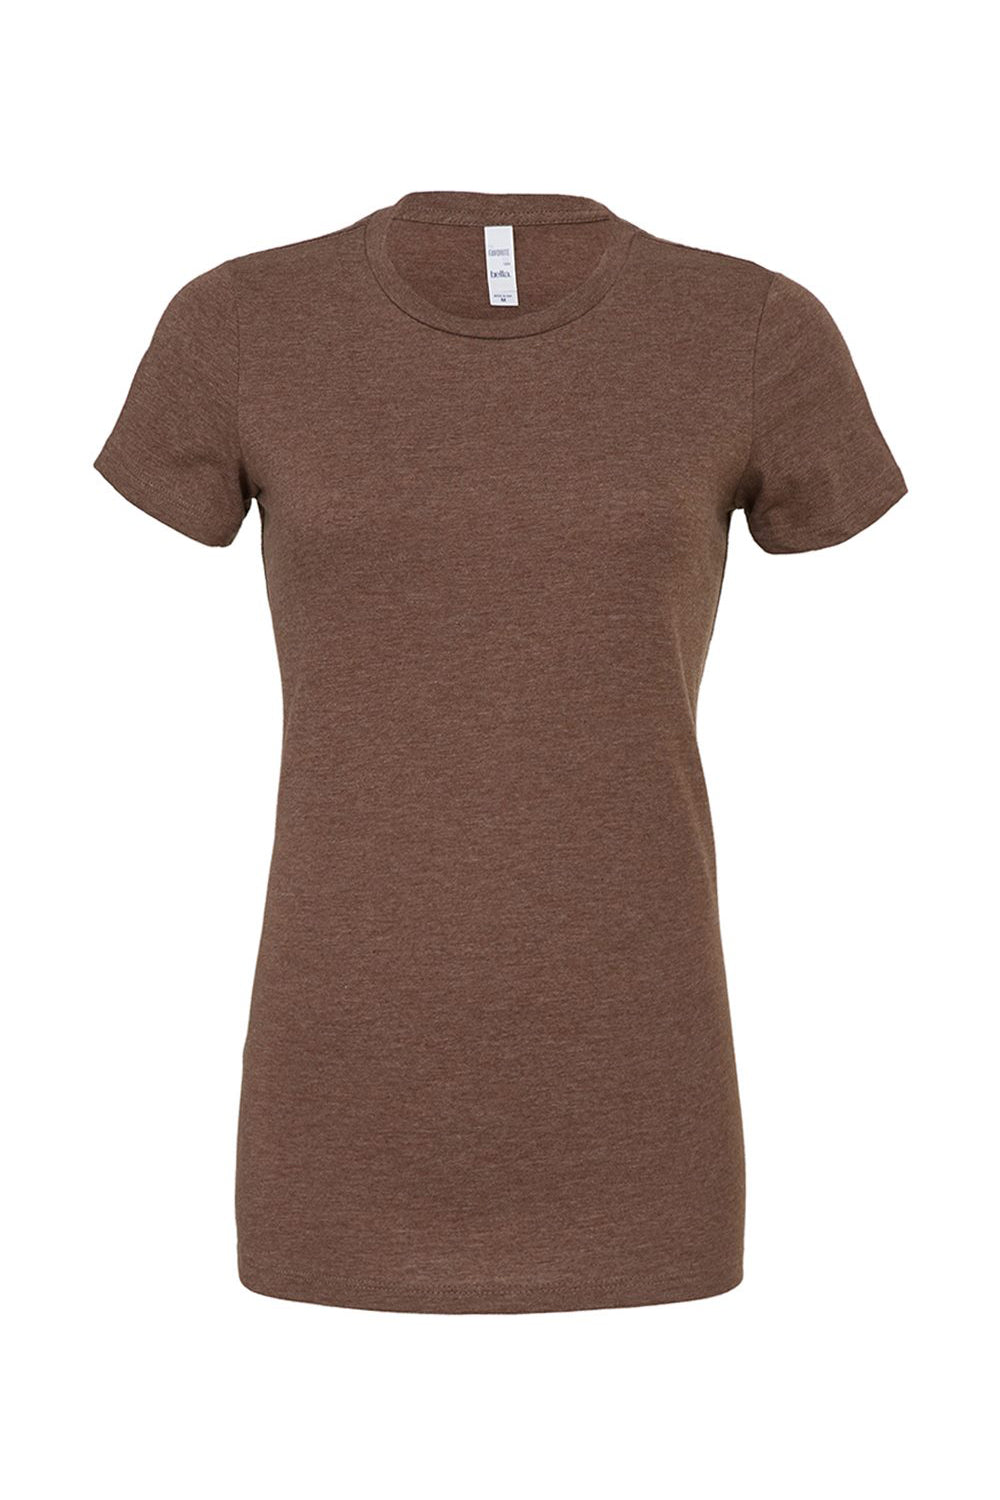 Bella + Canvas BC6004/6004 Womens The Favorite Short Sleeve Crewneck T-Shirt Heather Brown Flat Front